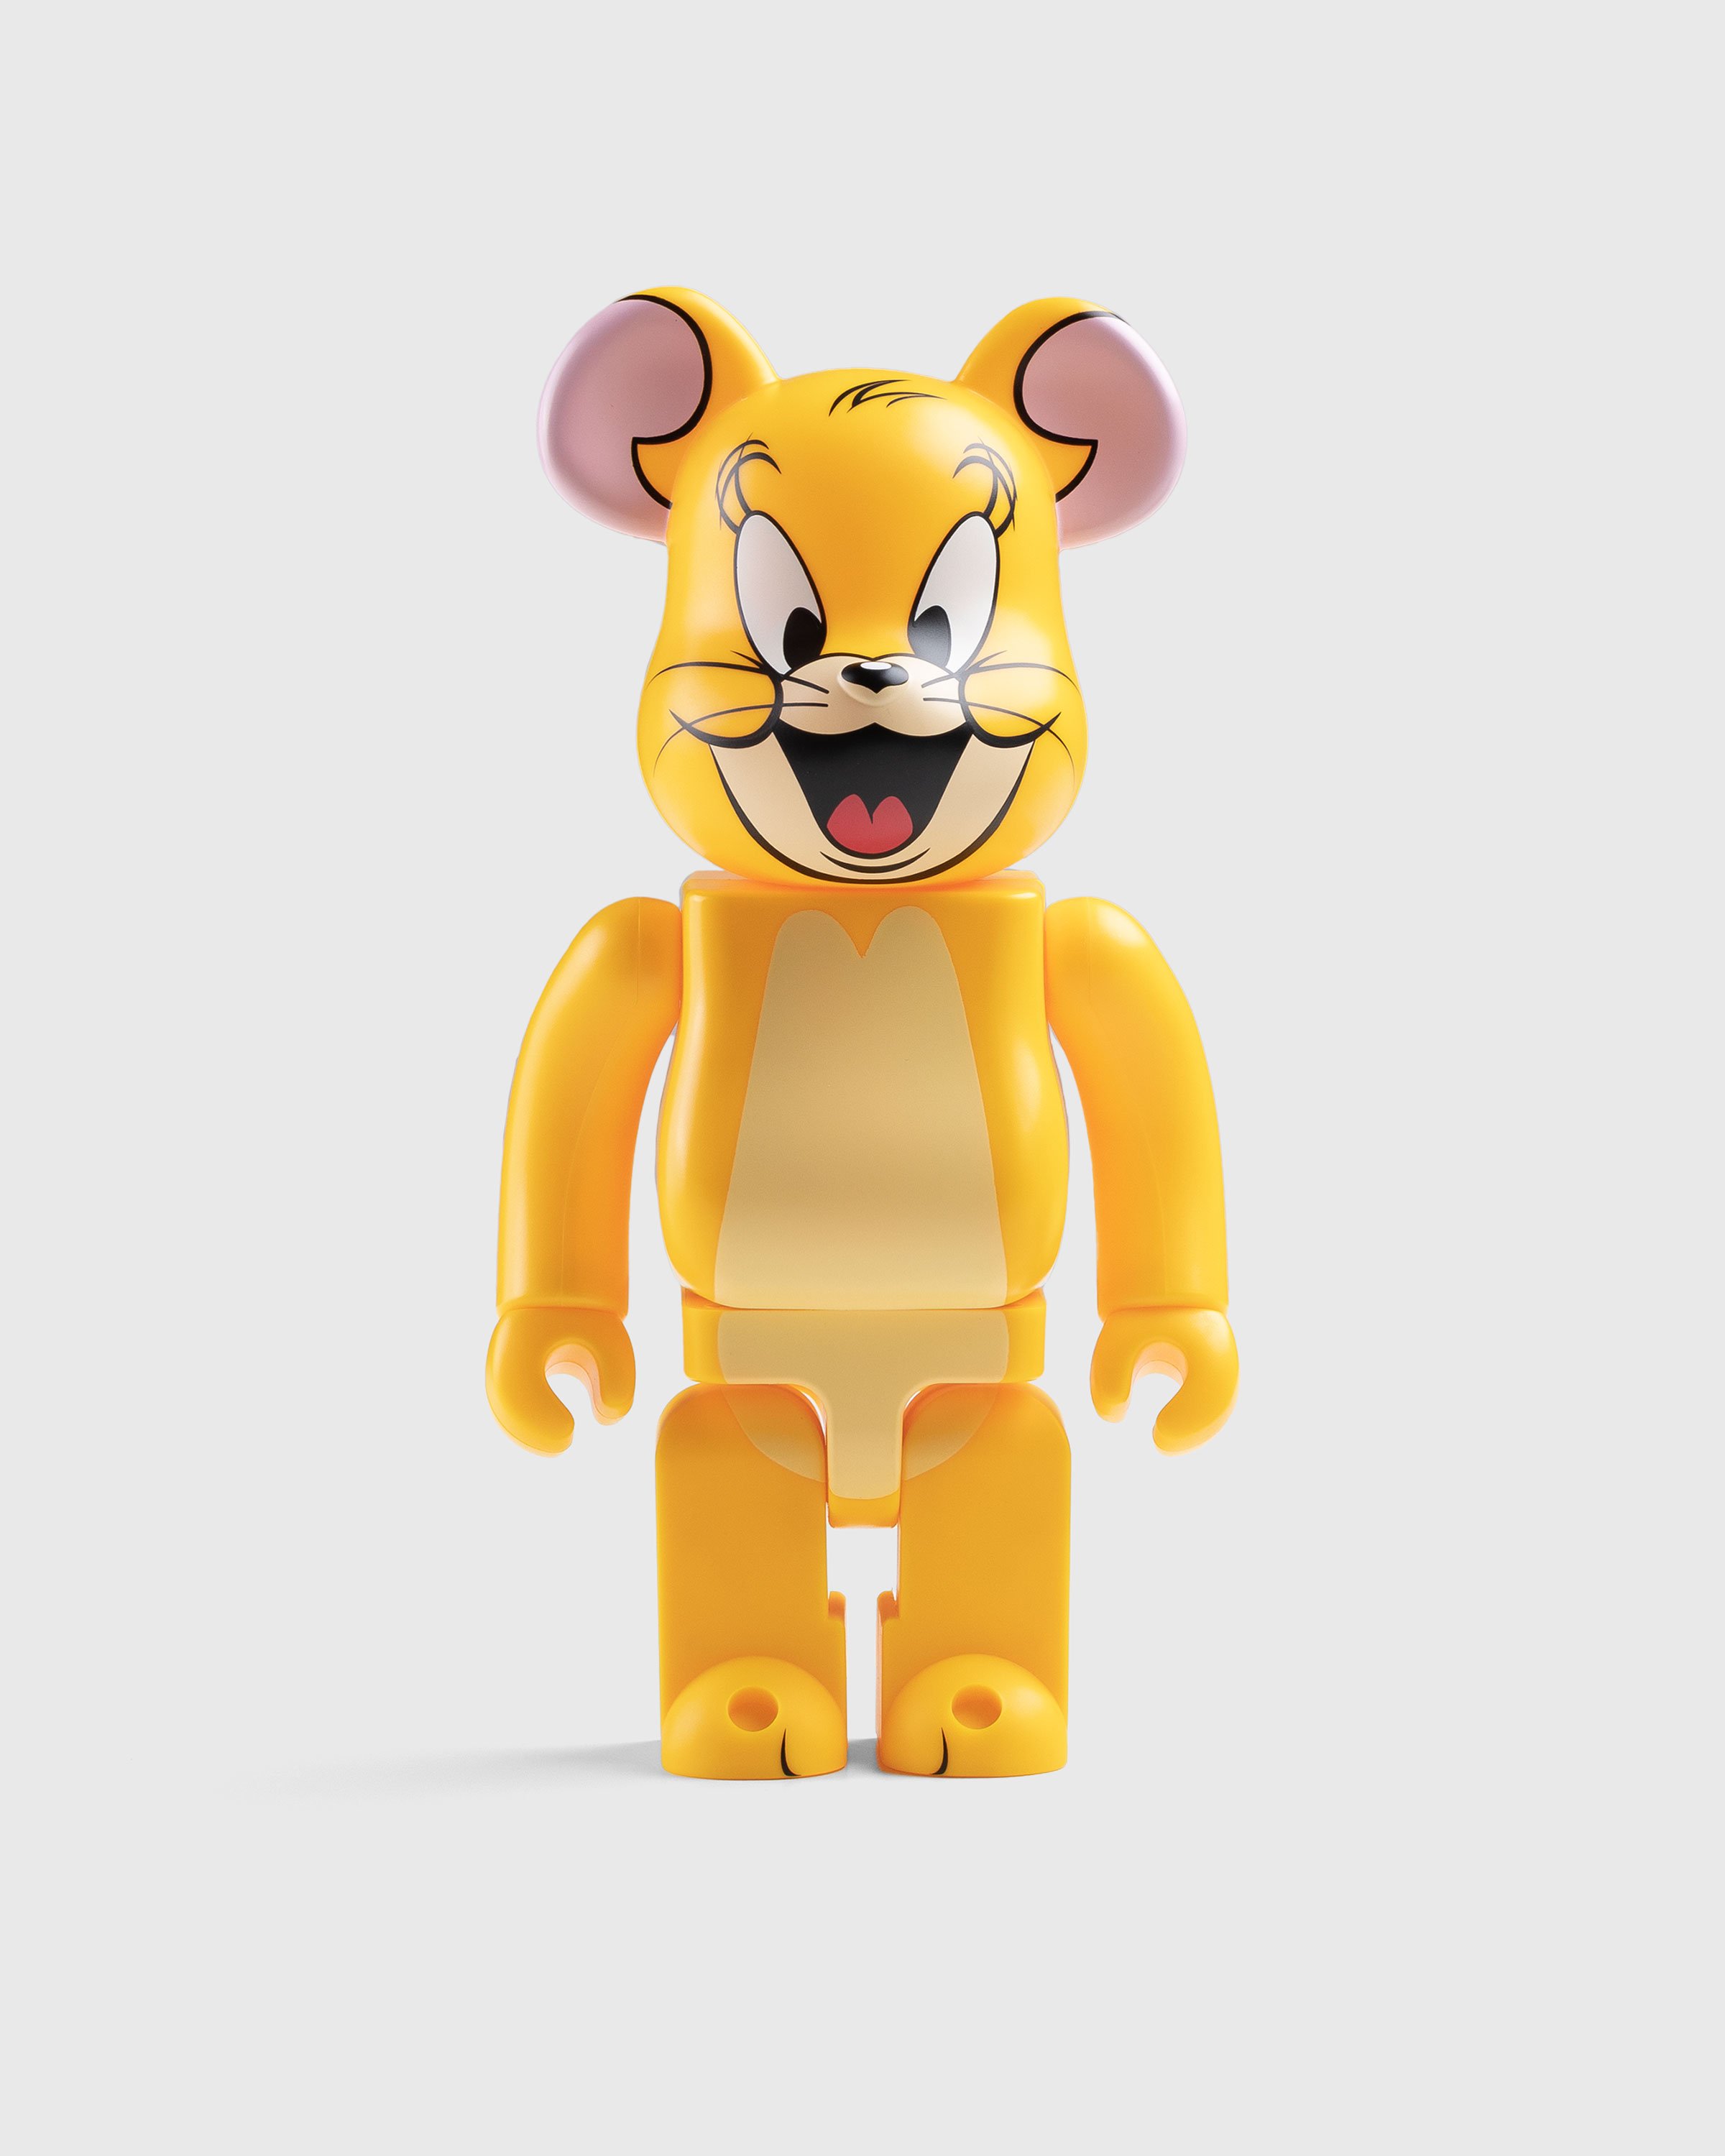 Medicom - BE@RBRICK TOM & JERRY JERRY (Classic Color) 1000% Yellow - Lifestyle - Yellow - Image 1